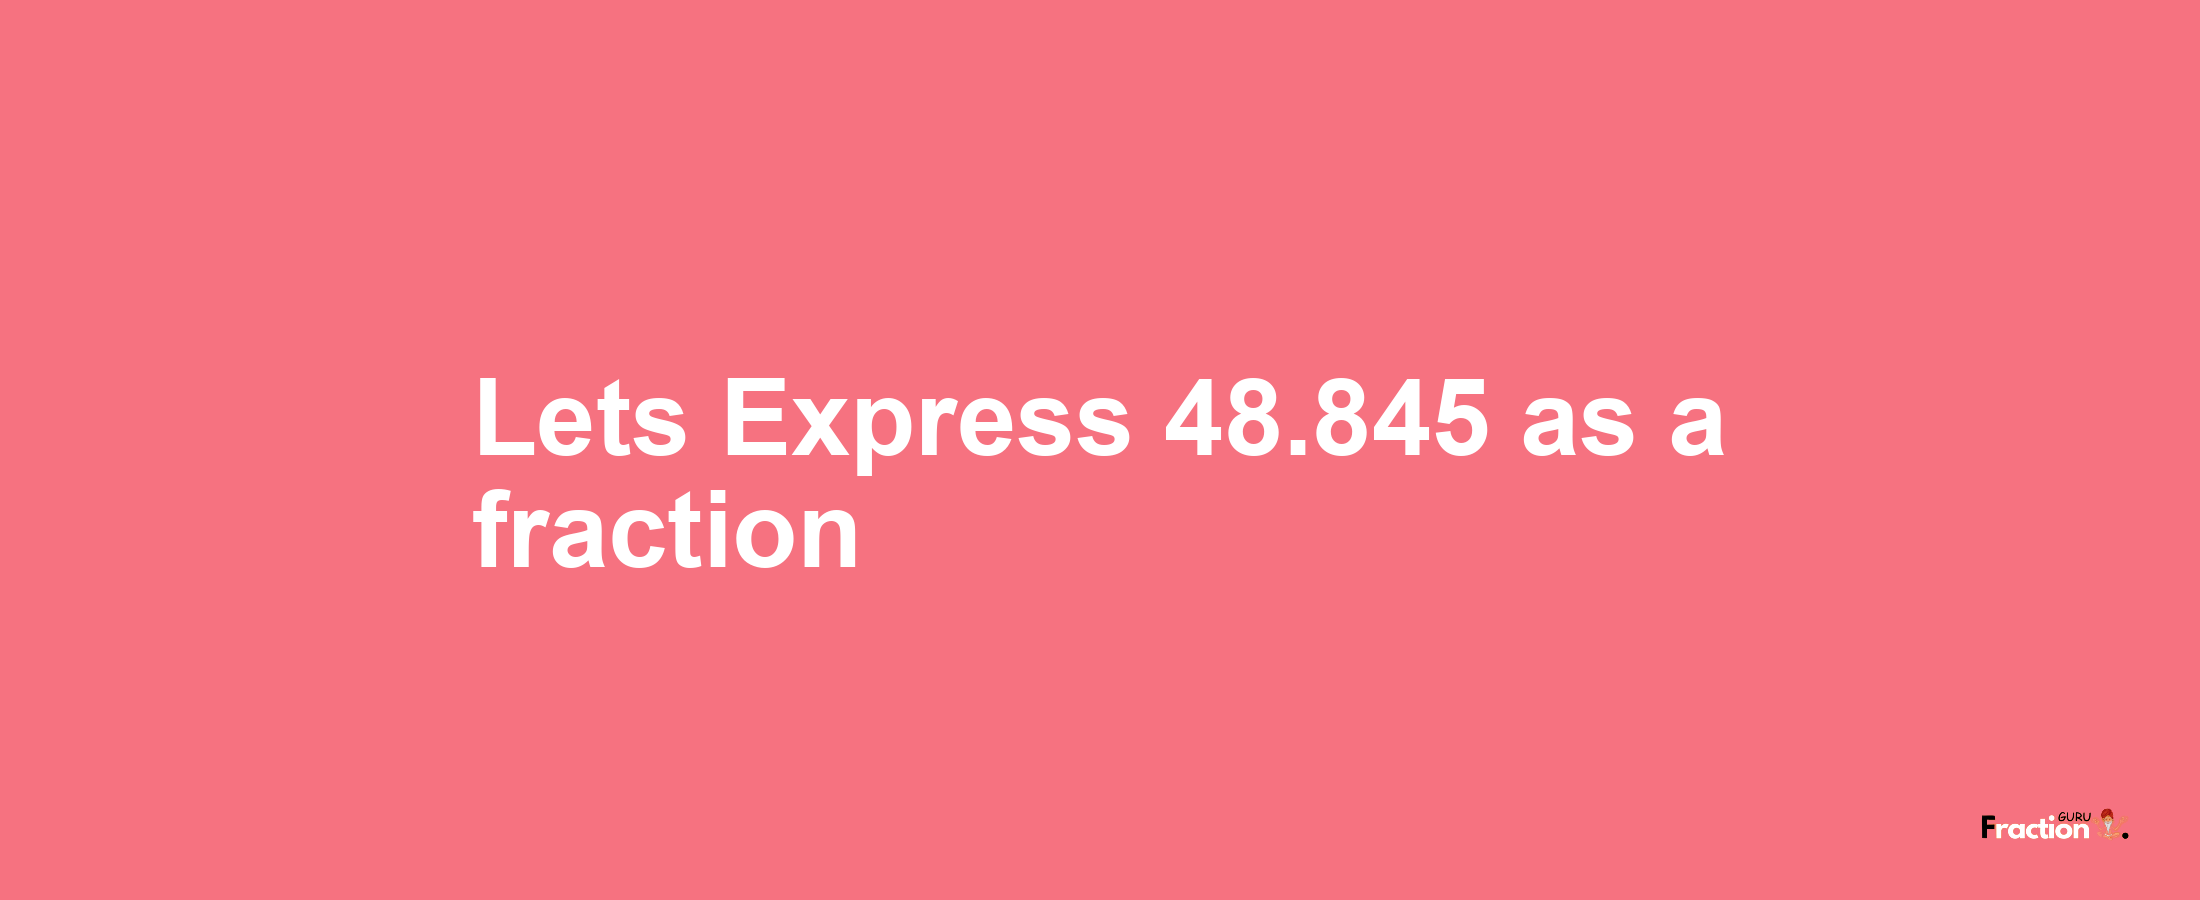 Lets Express 48.845 as afraction